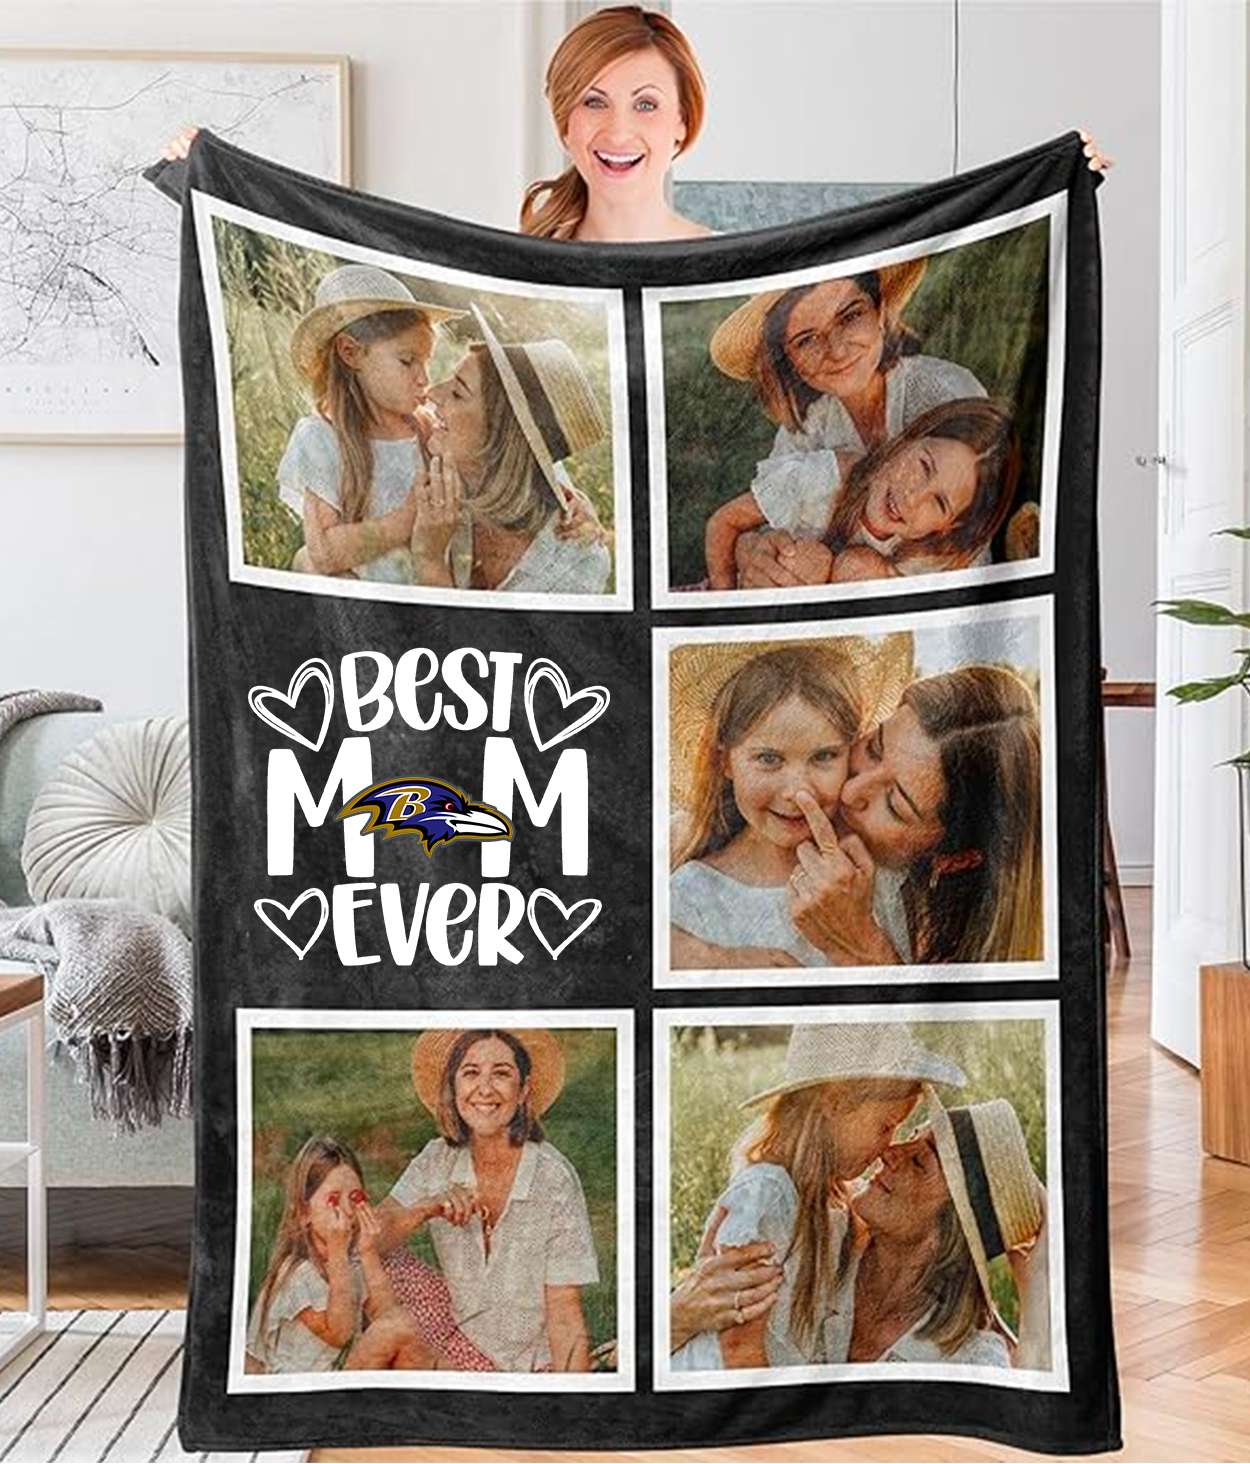 Best Mom Ever - Custom NFL Baltimore Ravens Blankets with Pictures for Mother's Day Gift